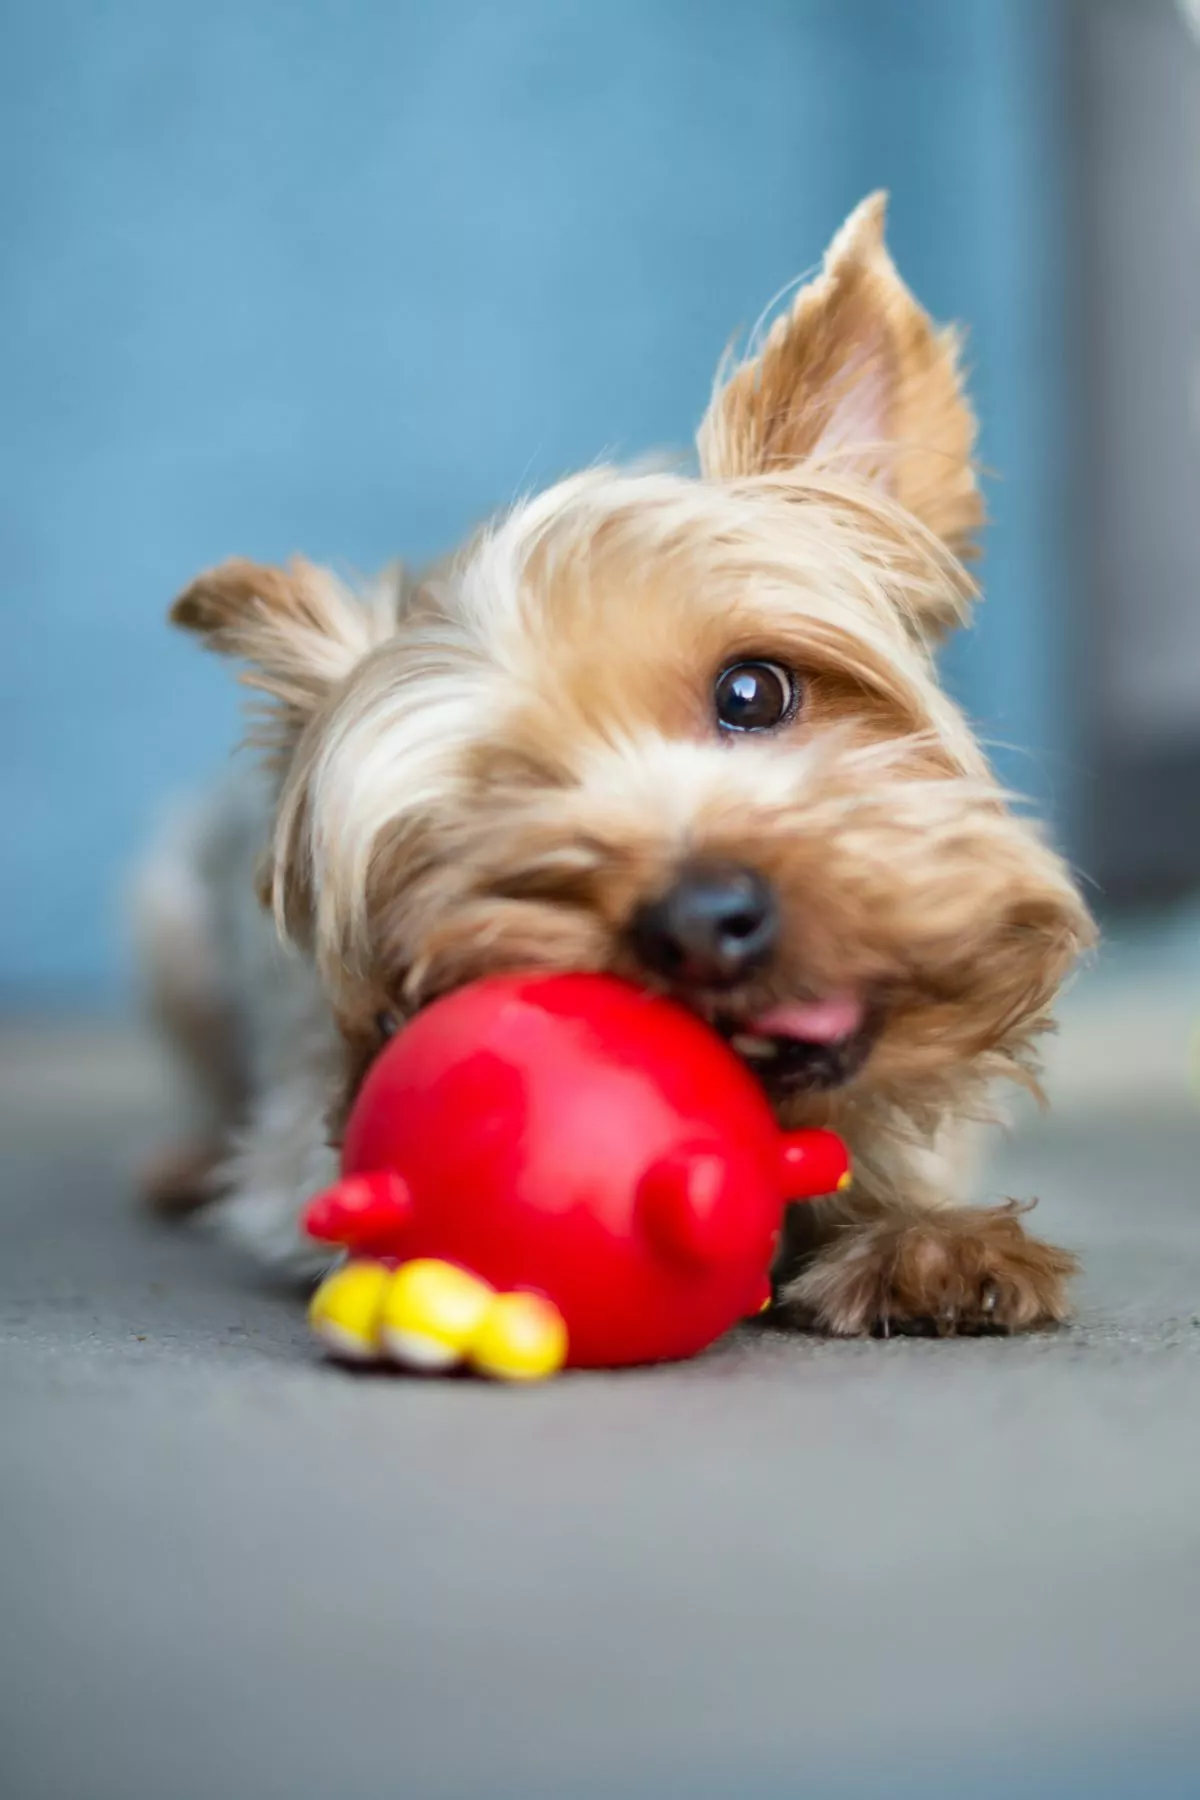 Yorkie chewing his toy